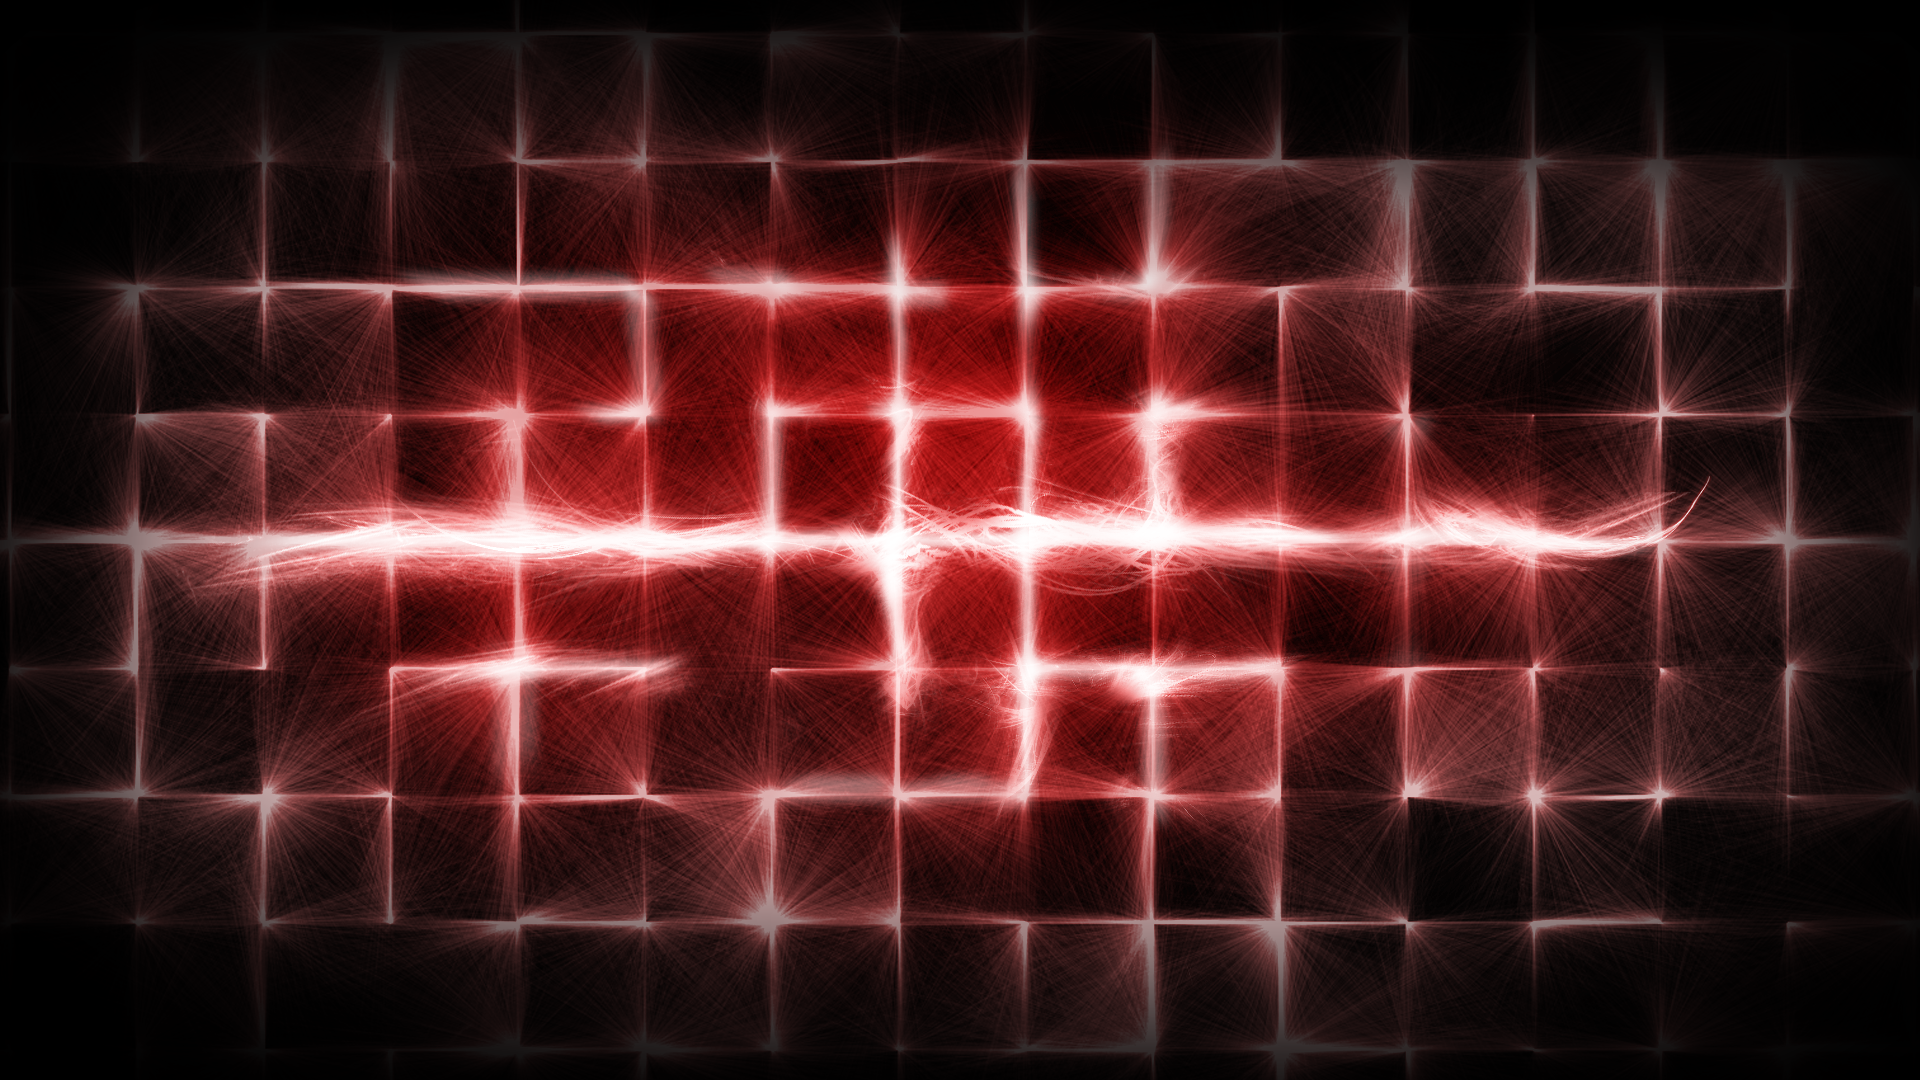 Red Grid Wallpapers